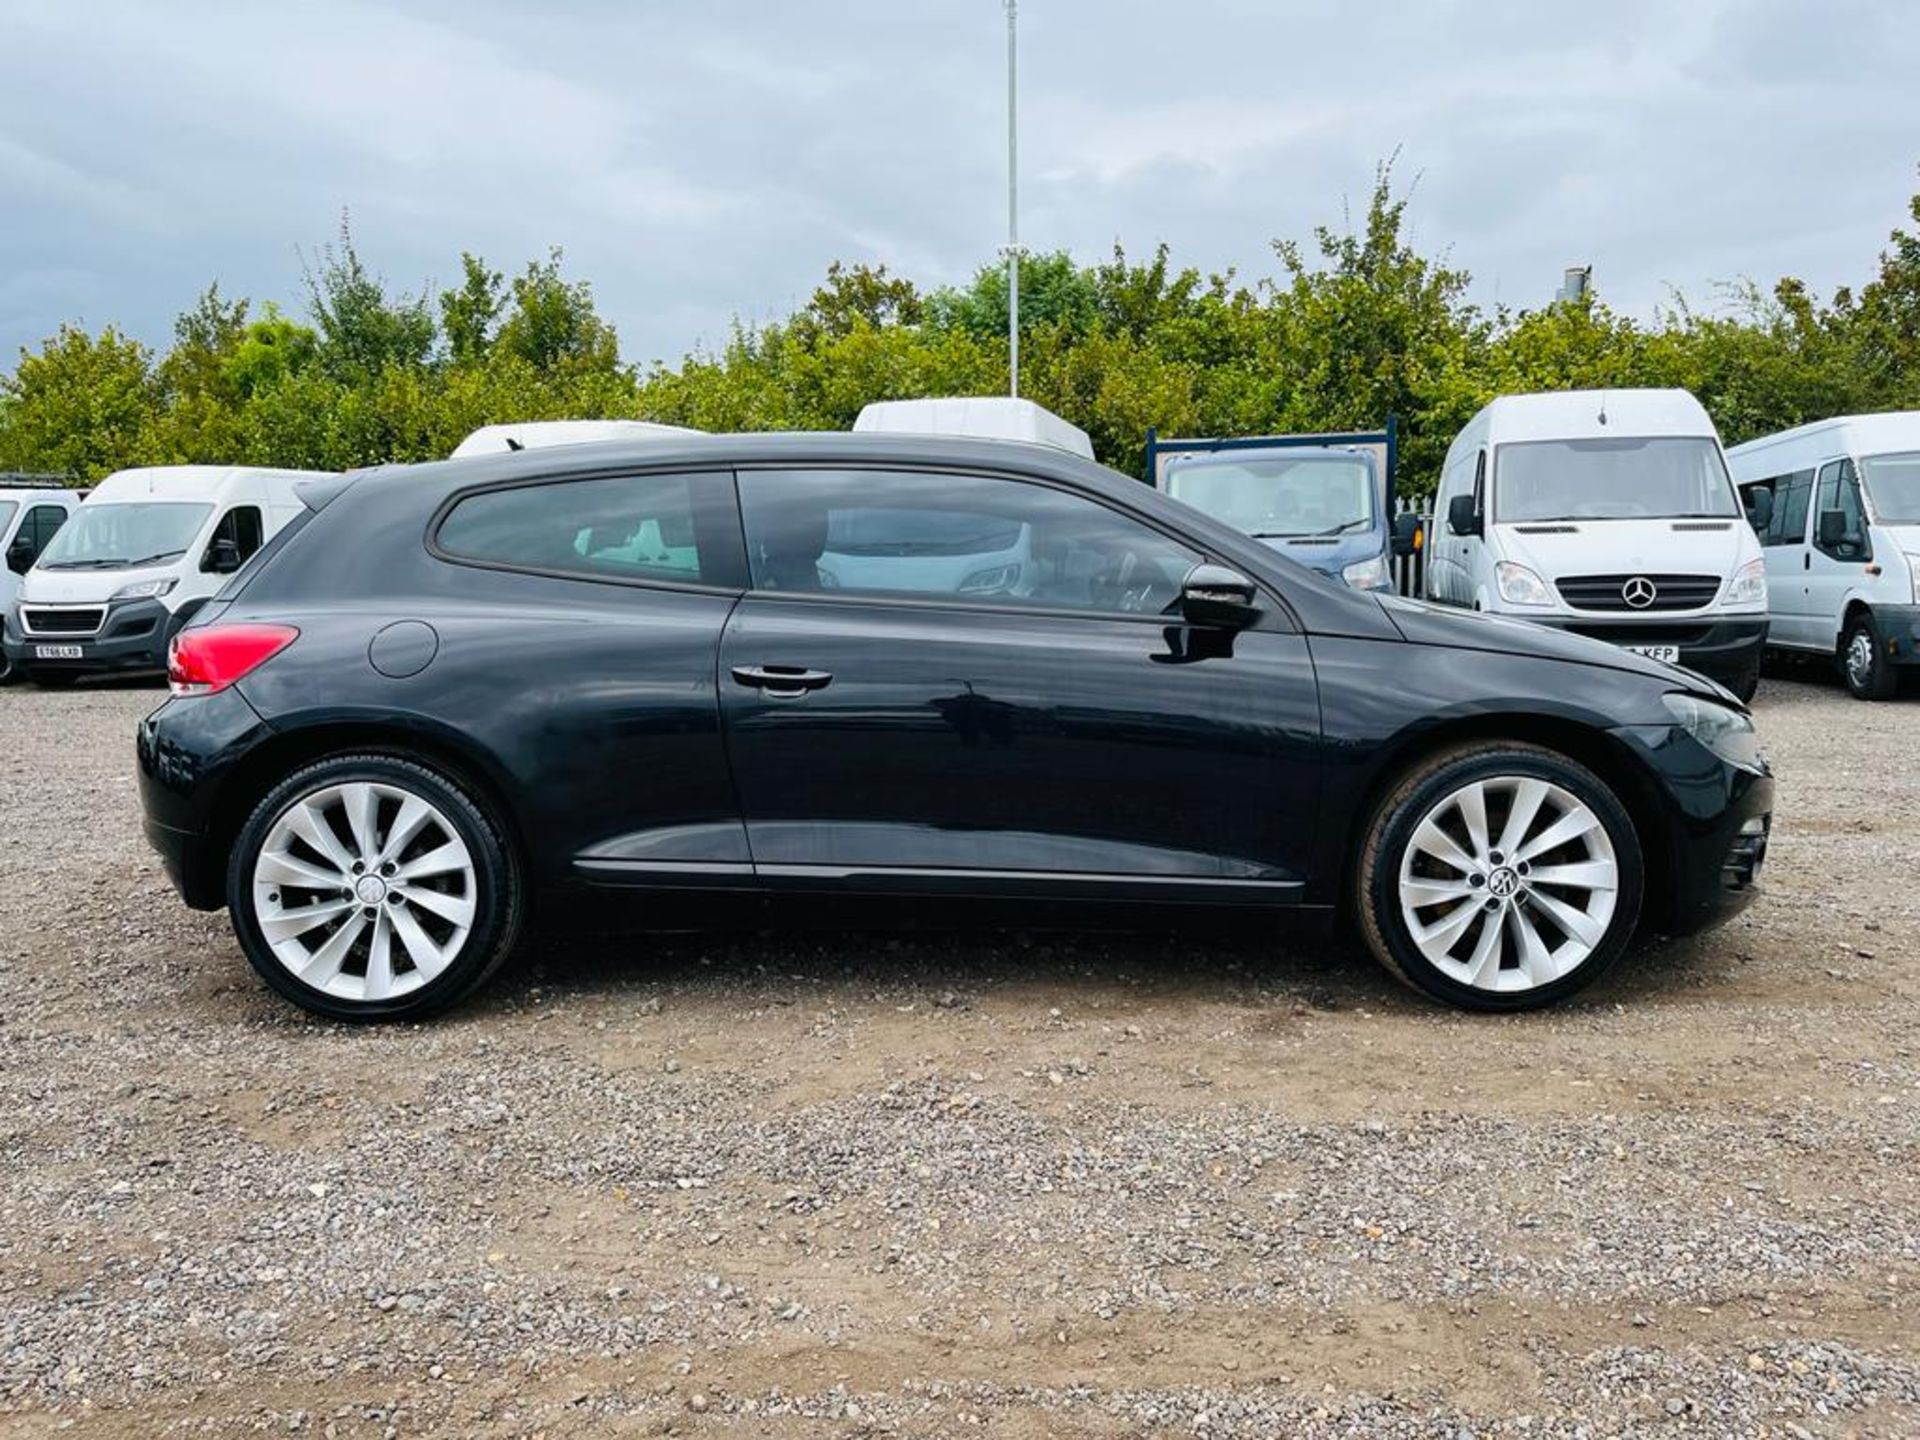 ** ON SALE ** Volkswagen Scirocco GT 2.0 TSI 210 Coupe 2010 '10 Reg' Sat Nav - A/C - Only 78719 - Image 4 of 25